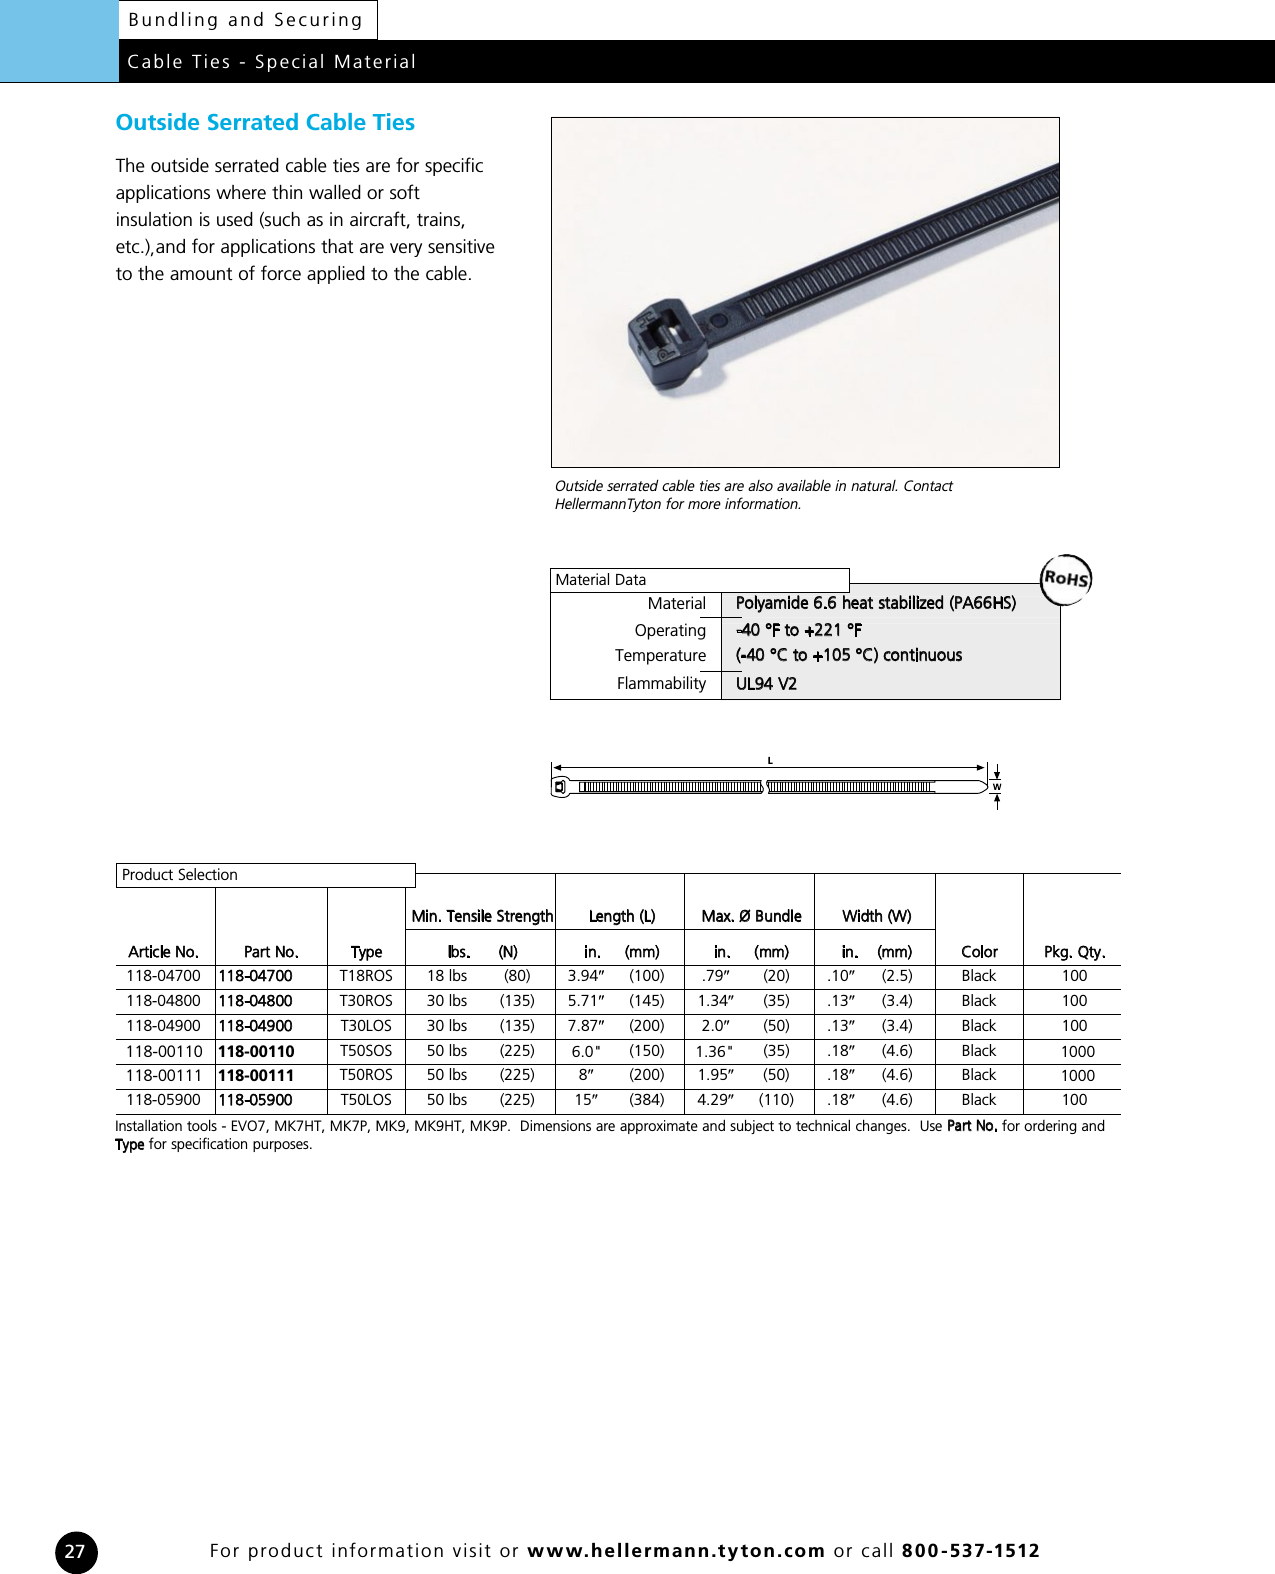 Pack of 100 Hellermann Tyton T50R6C2 Standard Cable Tie 50lb Tensile Strength PA66 8 Long Blue 